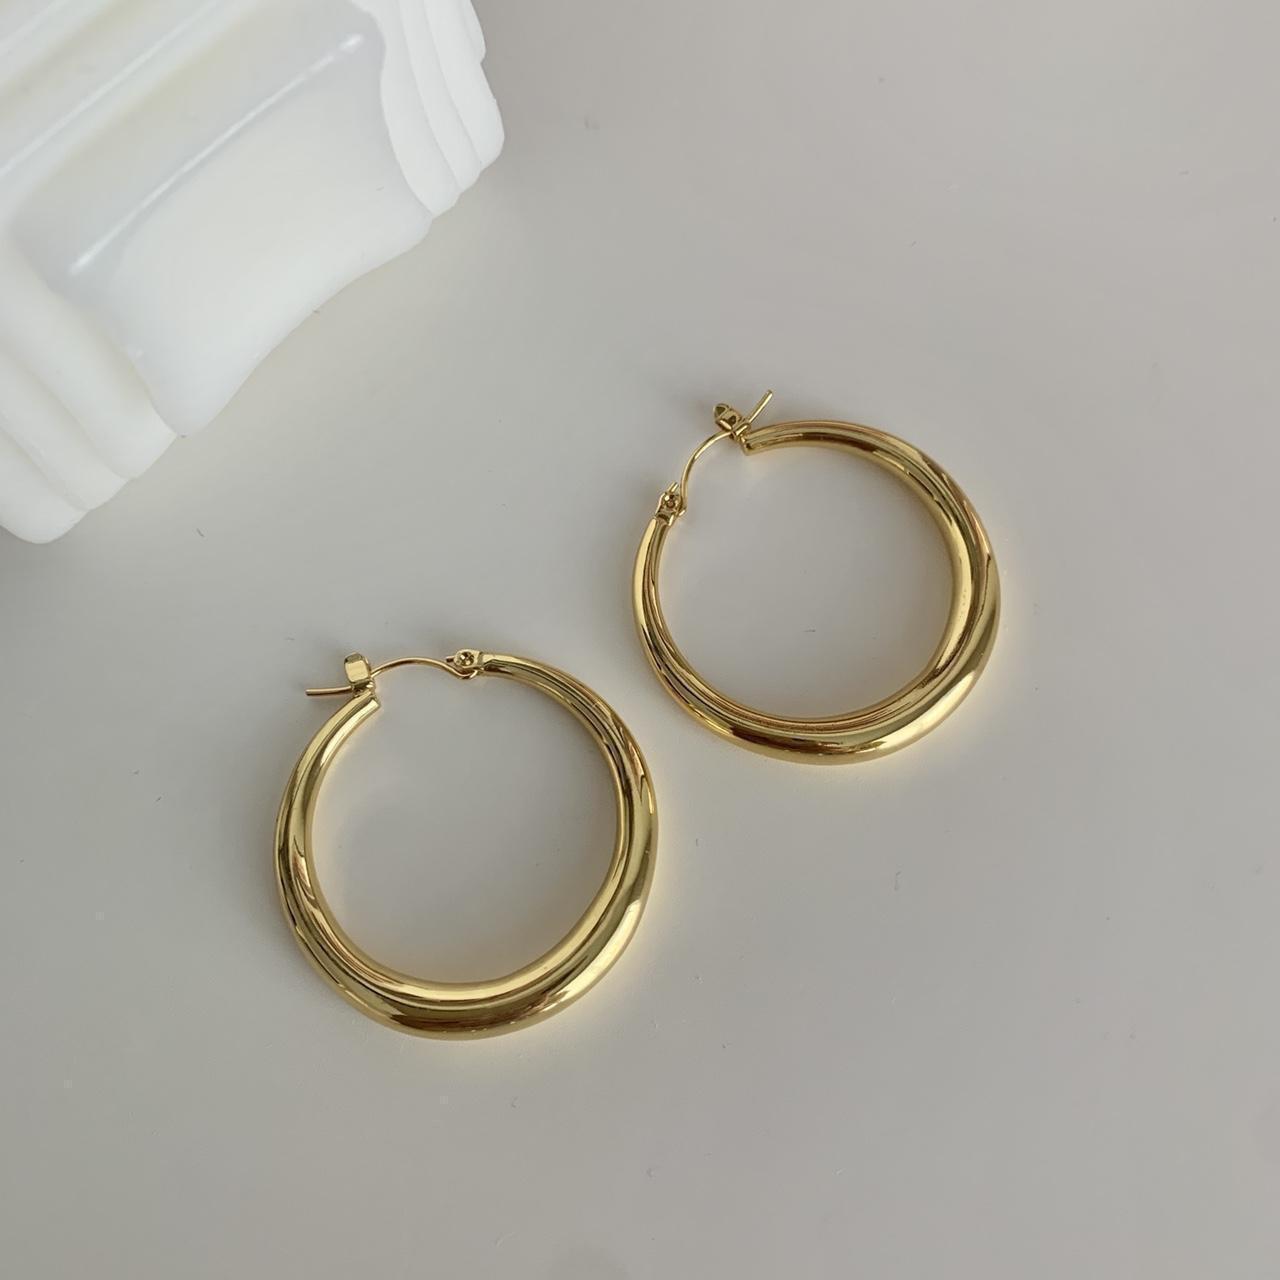 Gold Hoop Earrings Very chic design. Perfect for... - Depop